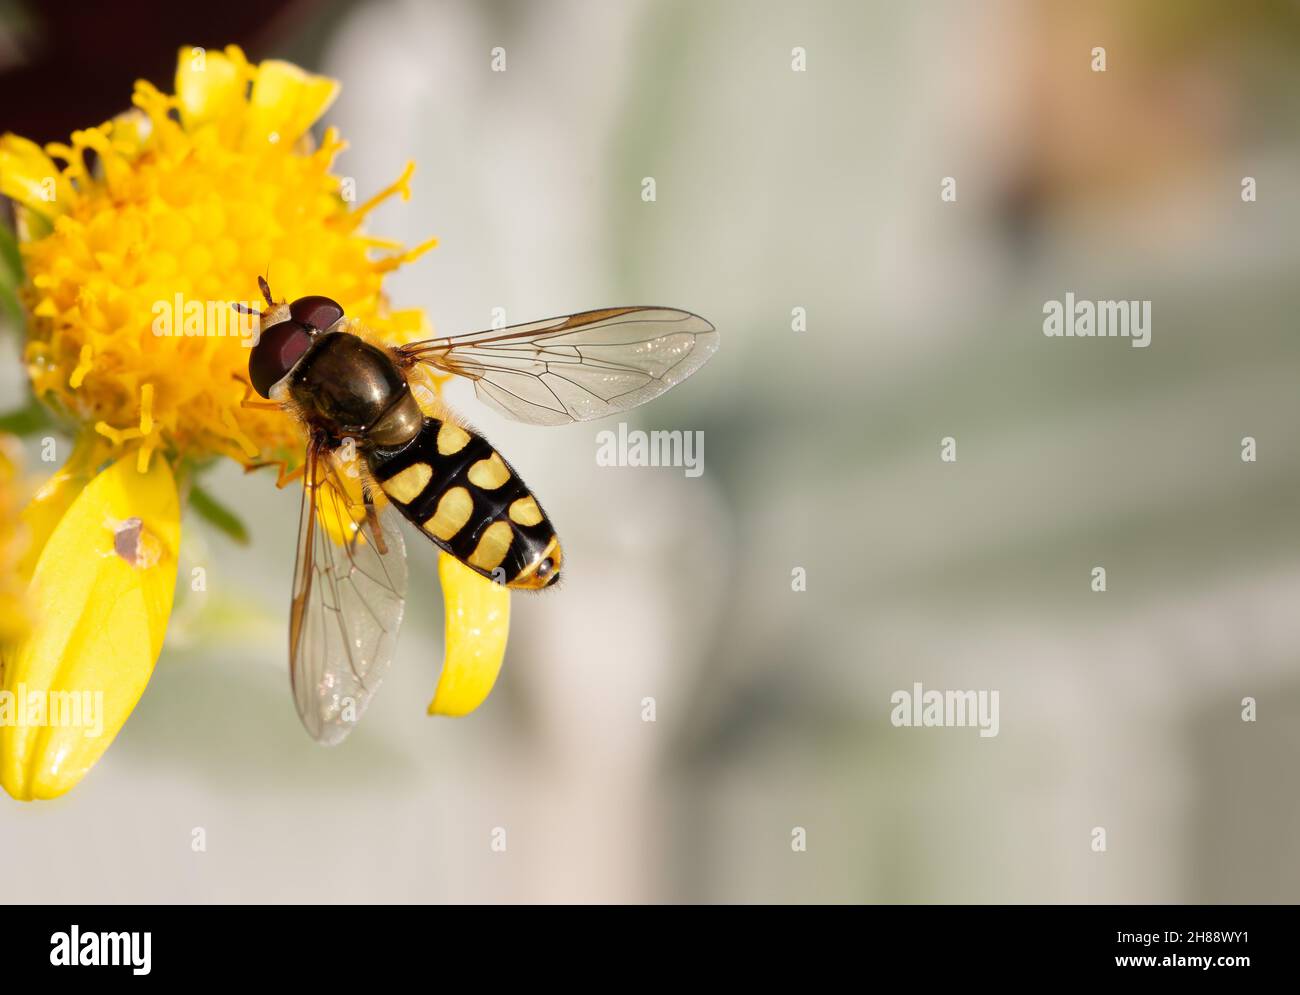 Hover fly / Marmalade hoverfly (Episyrphus balteatus) on yellow flower head with copy space Stock Photo